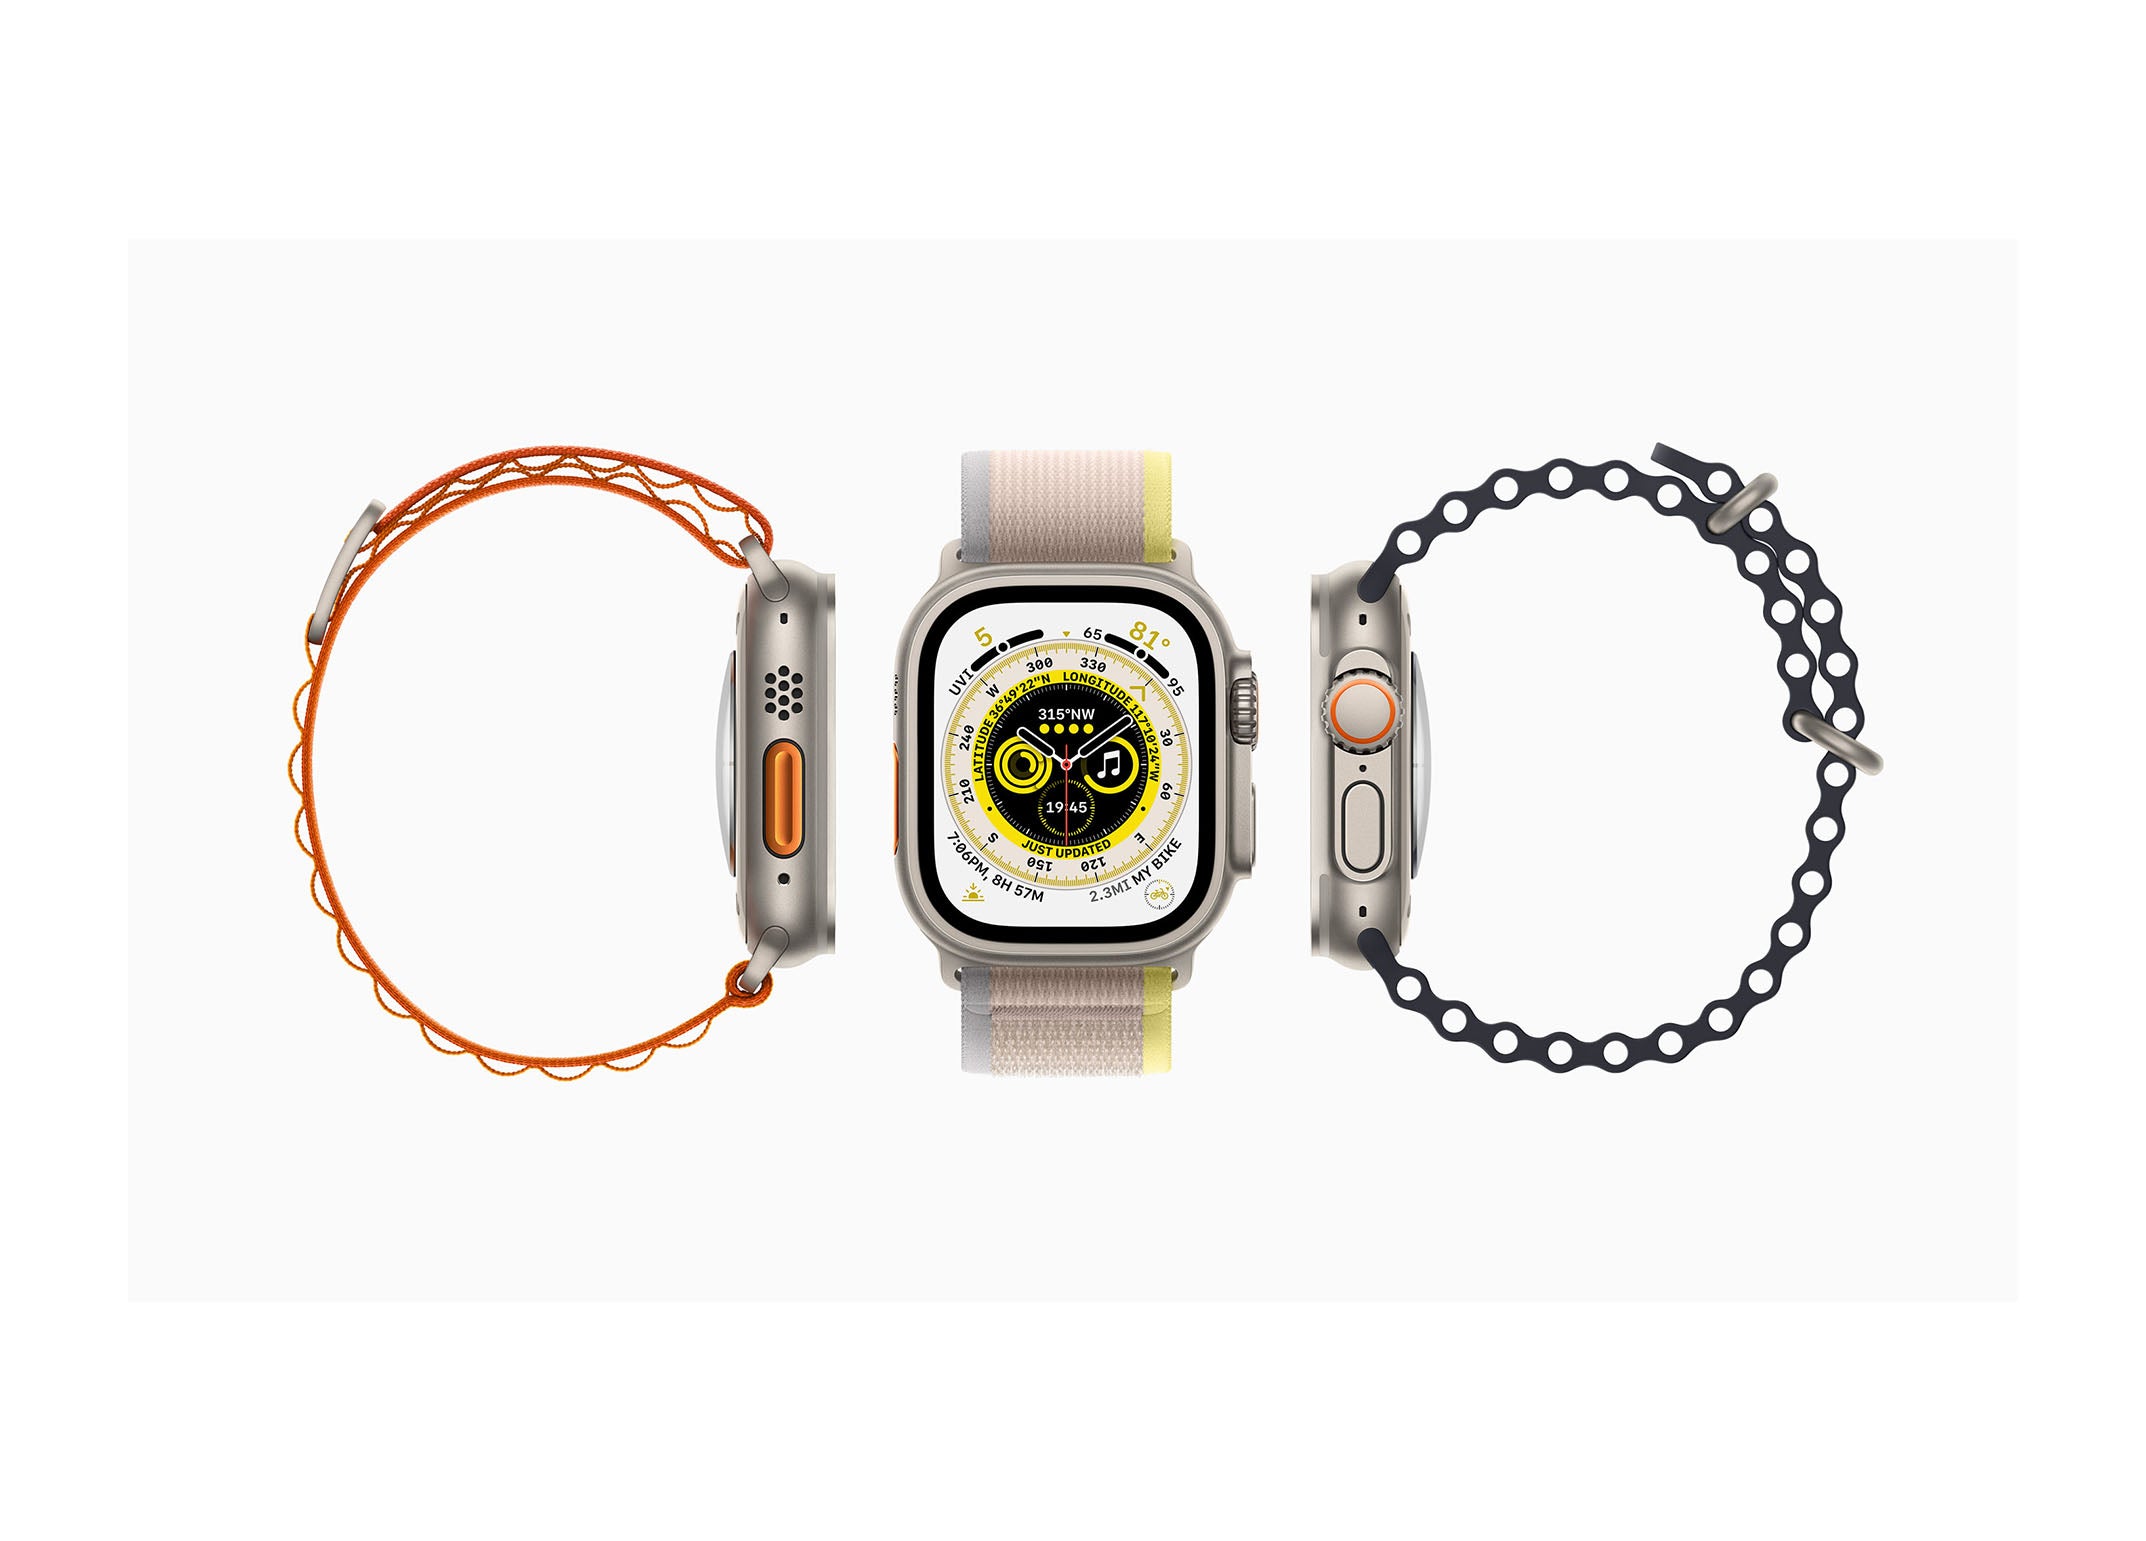 The Apple Watch ultra features an action button and a more rugged design for extreme sports